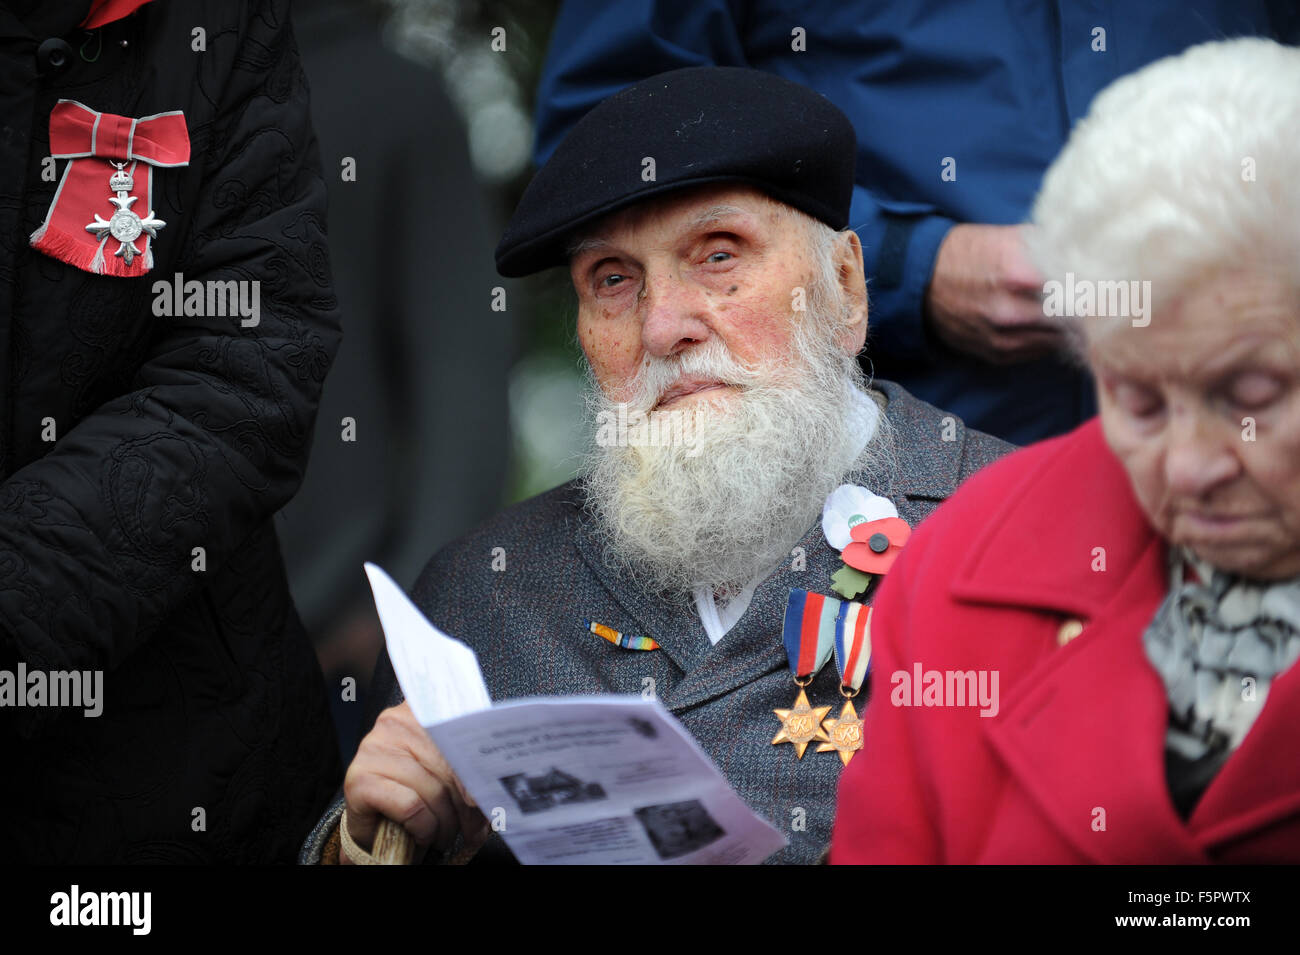 World War II veteran 92 year old George Evans at Remembrance Service. George who is pacifist was sacked from from reading this year's poem at the Remembrance Service in Wellington. Credit:  David Bagnall/Alamy Live News Stock Photo